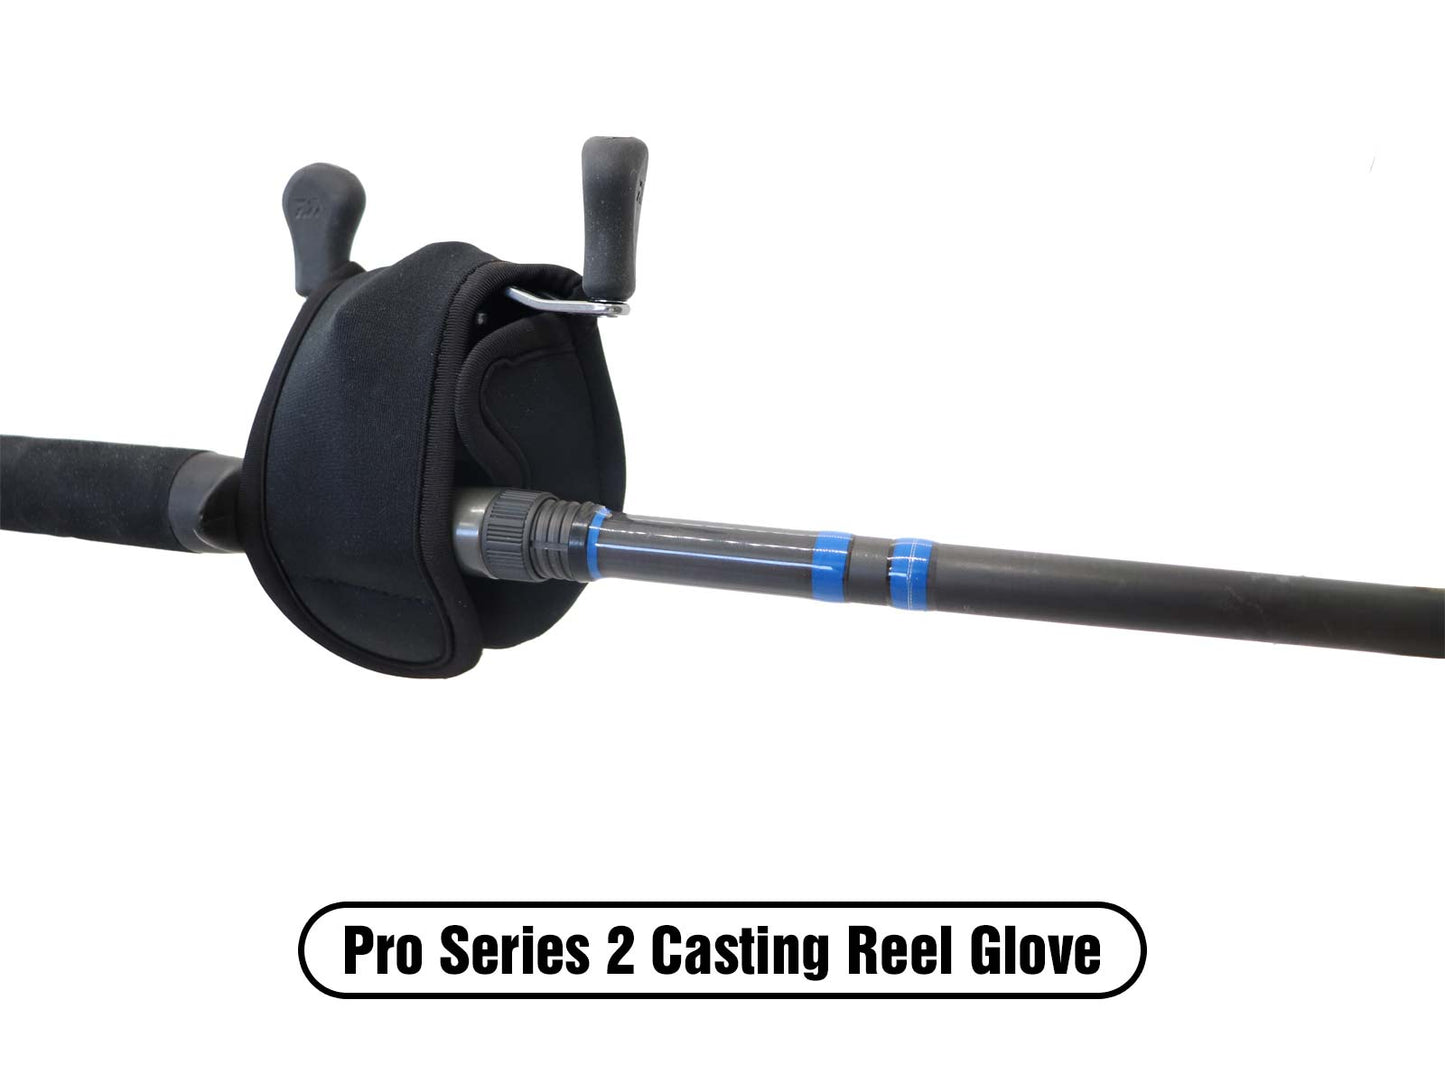 The Reel Glove - Casting PS2